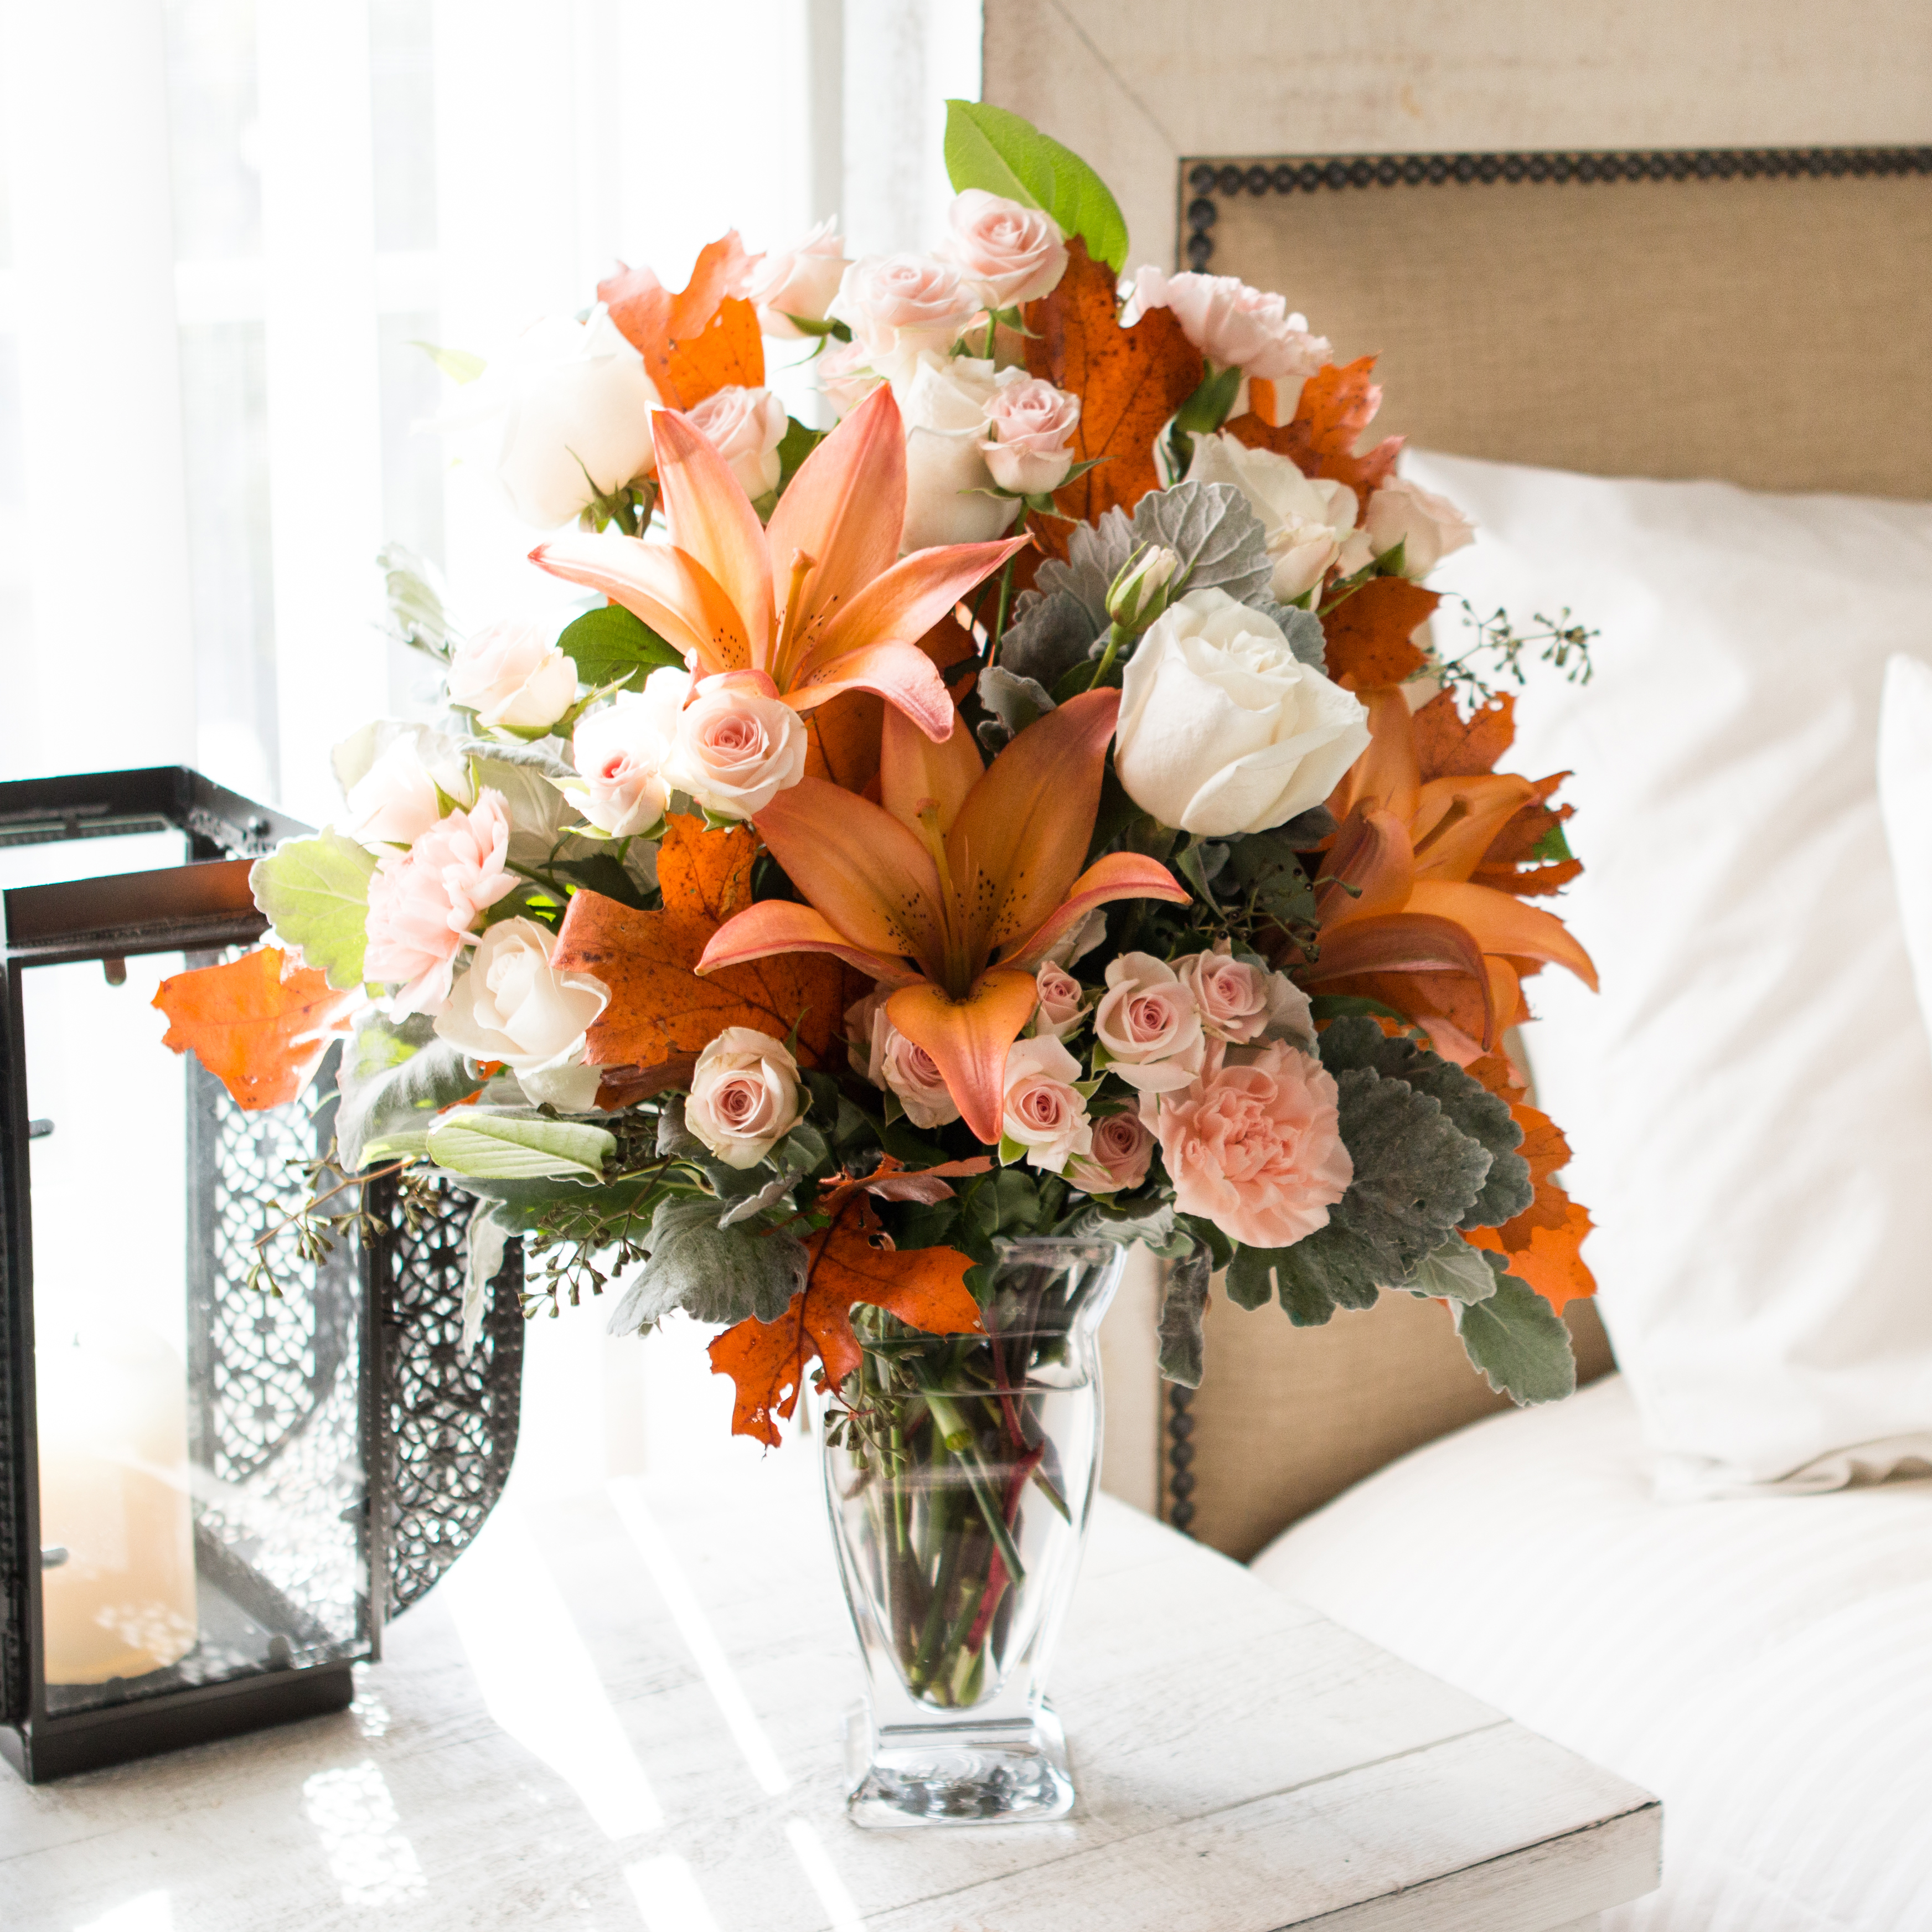 Orange lilies, light pink roses, greenery and more in a clear vase on a bedside table